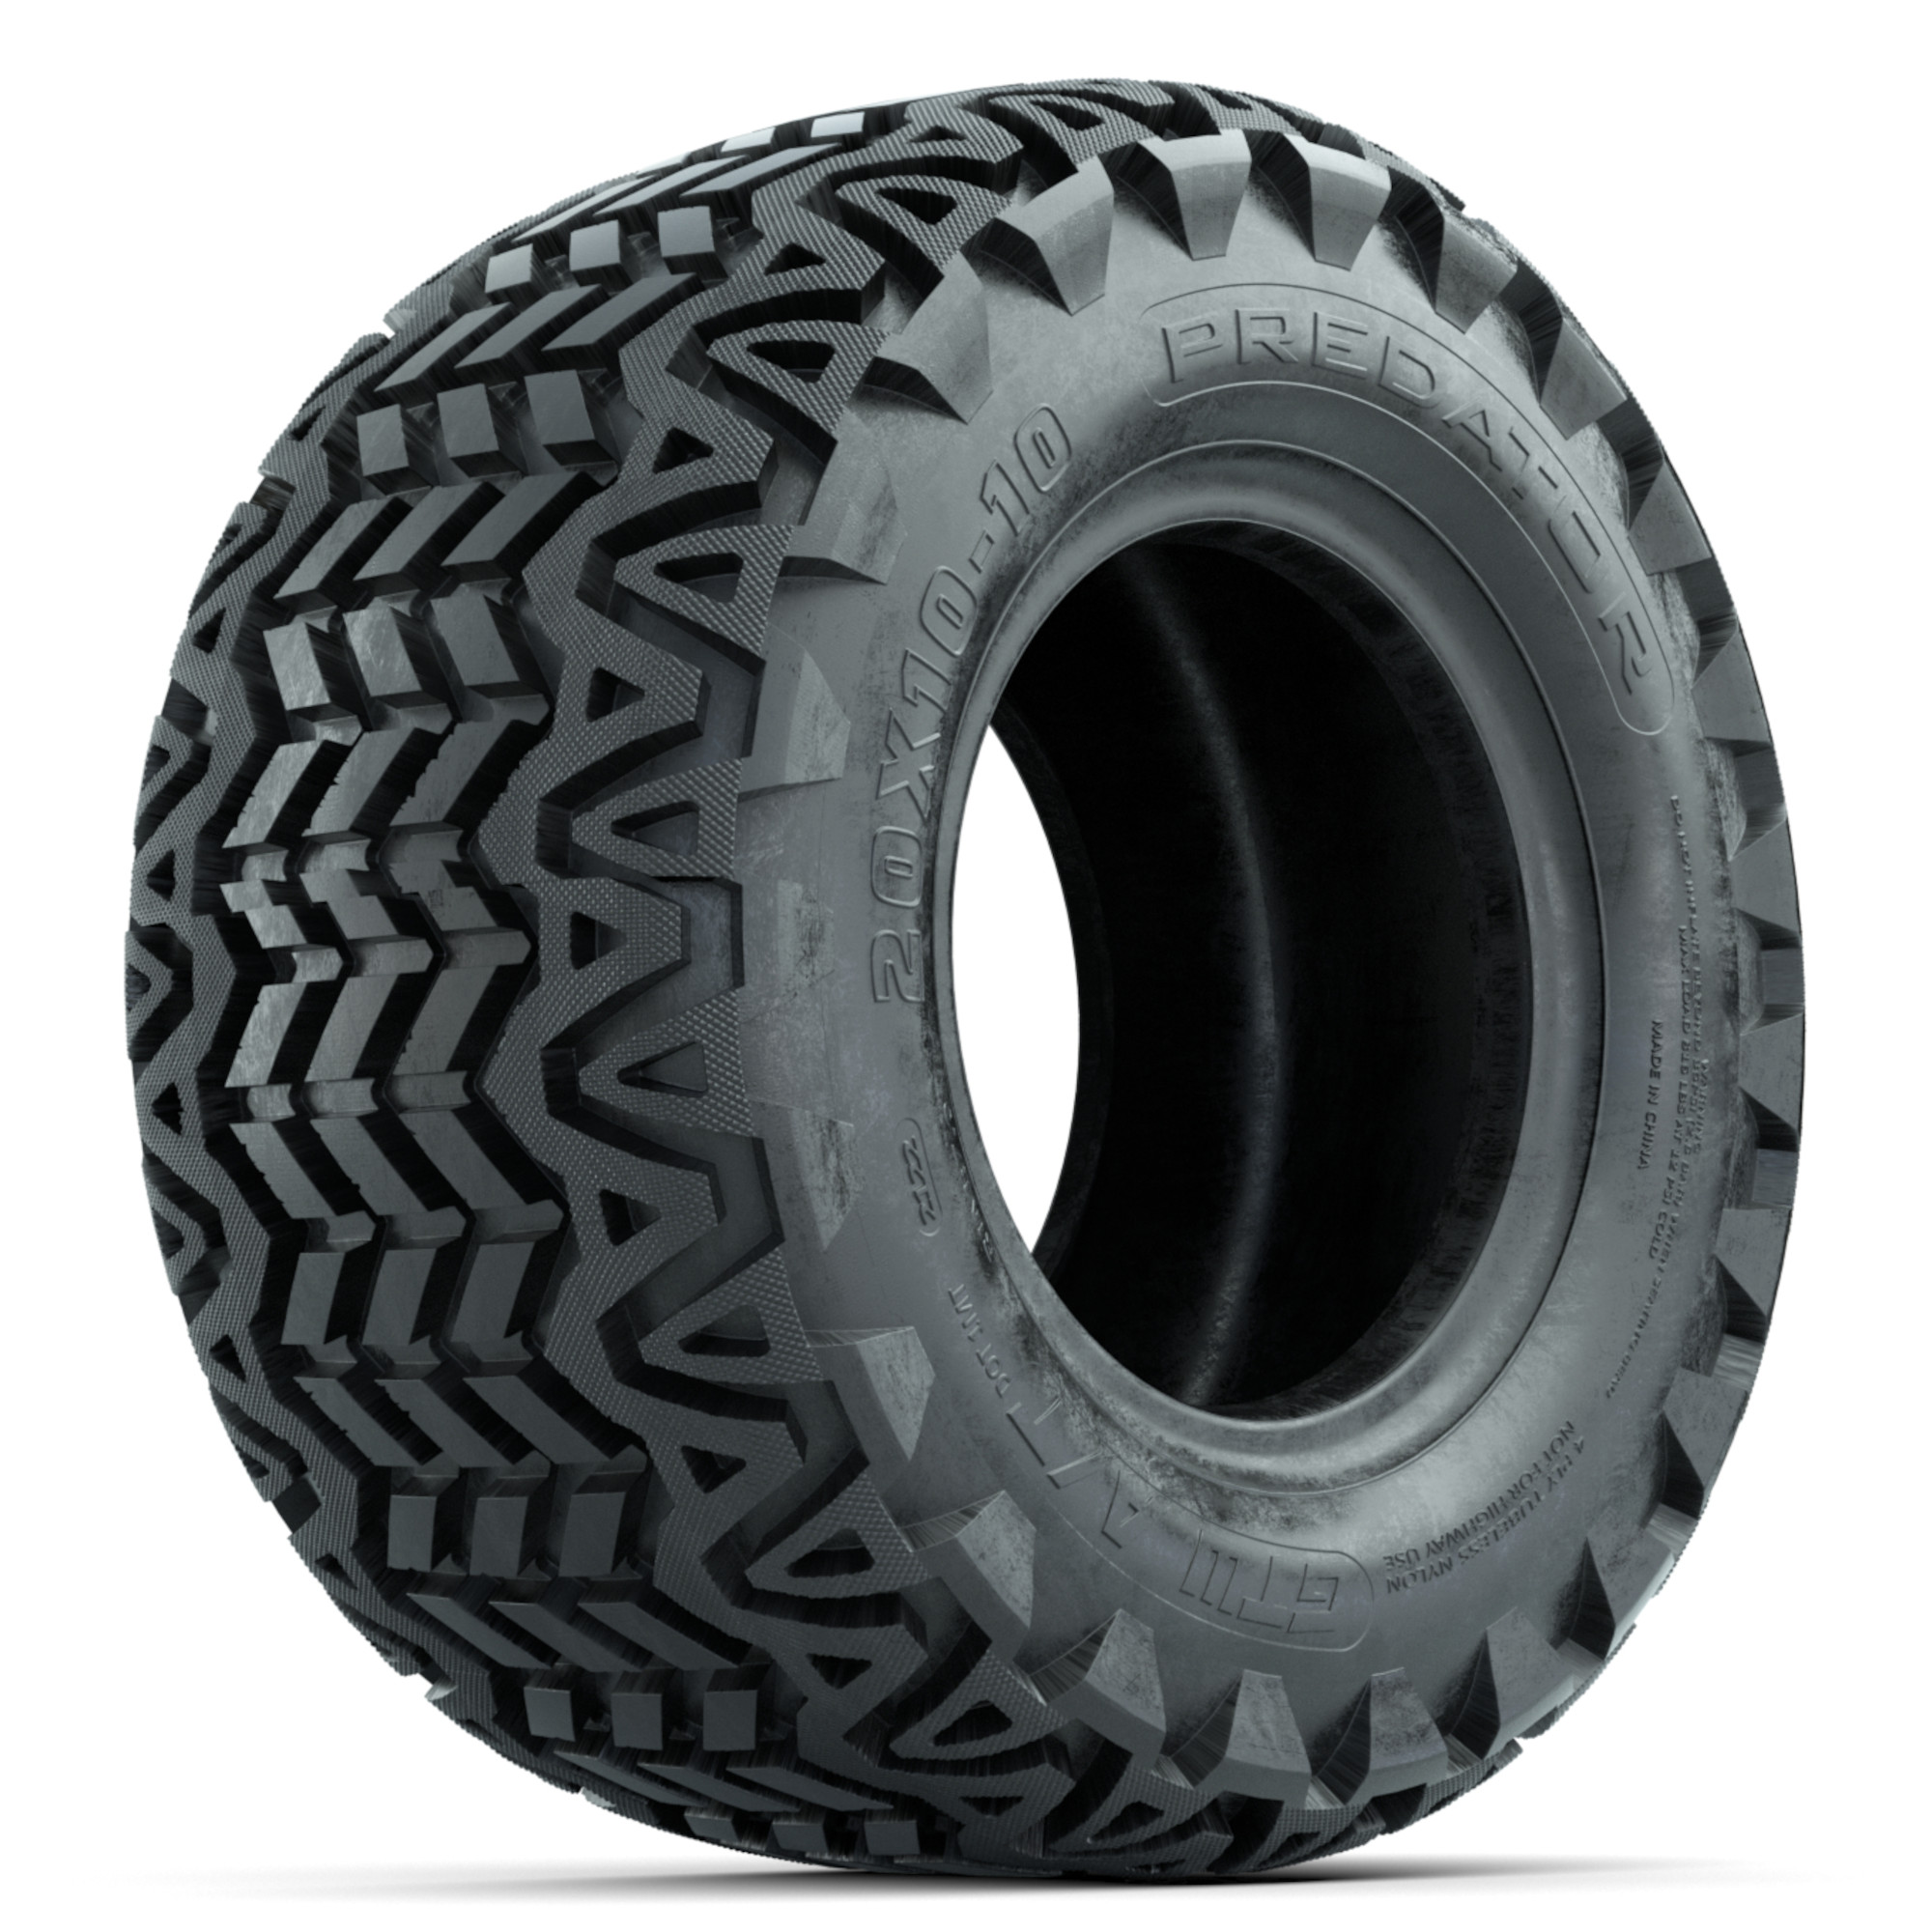 GTW Predator All-Terrain Tire from Buggies Unlimited | BuggiesUnlimited.com